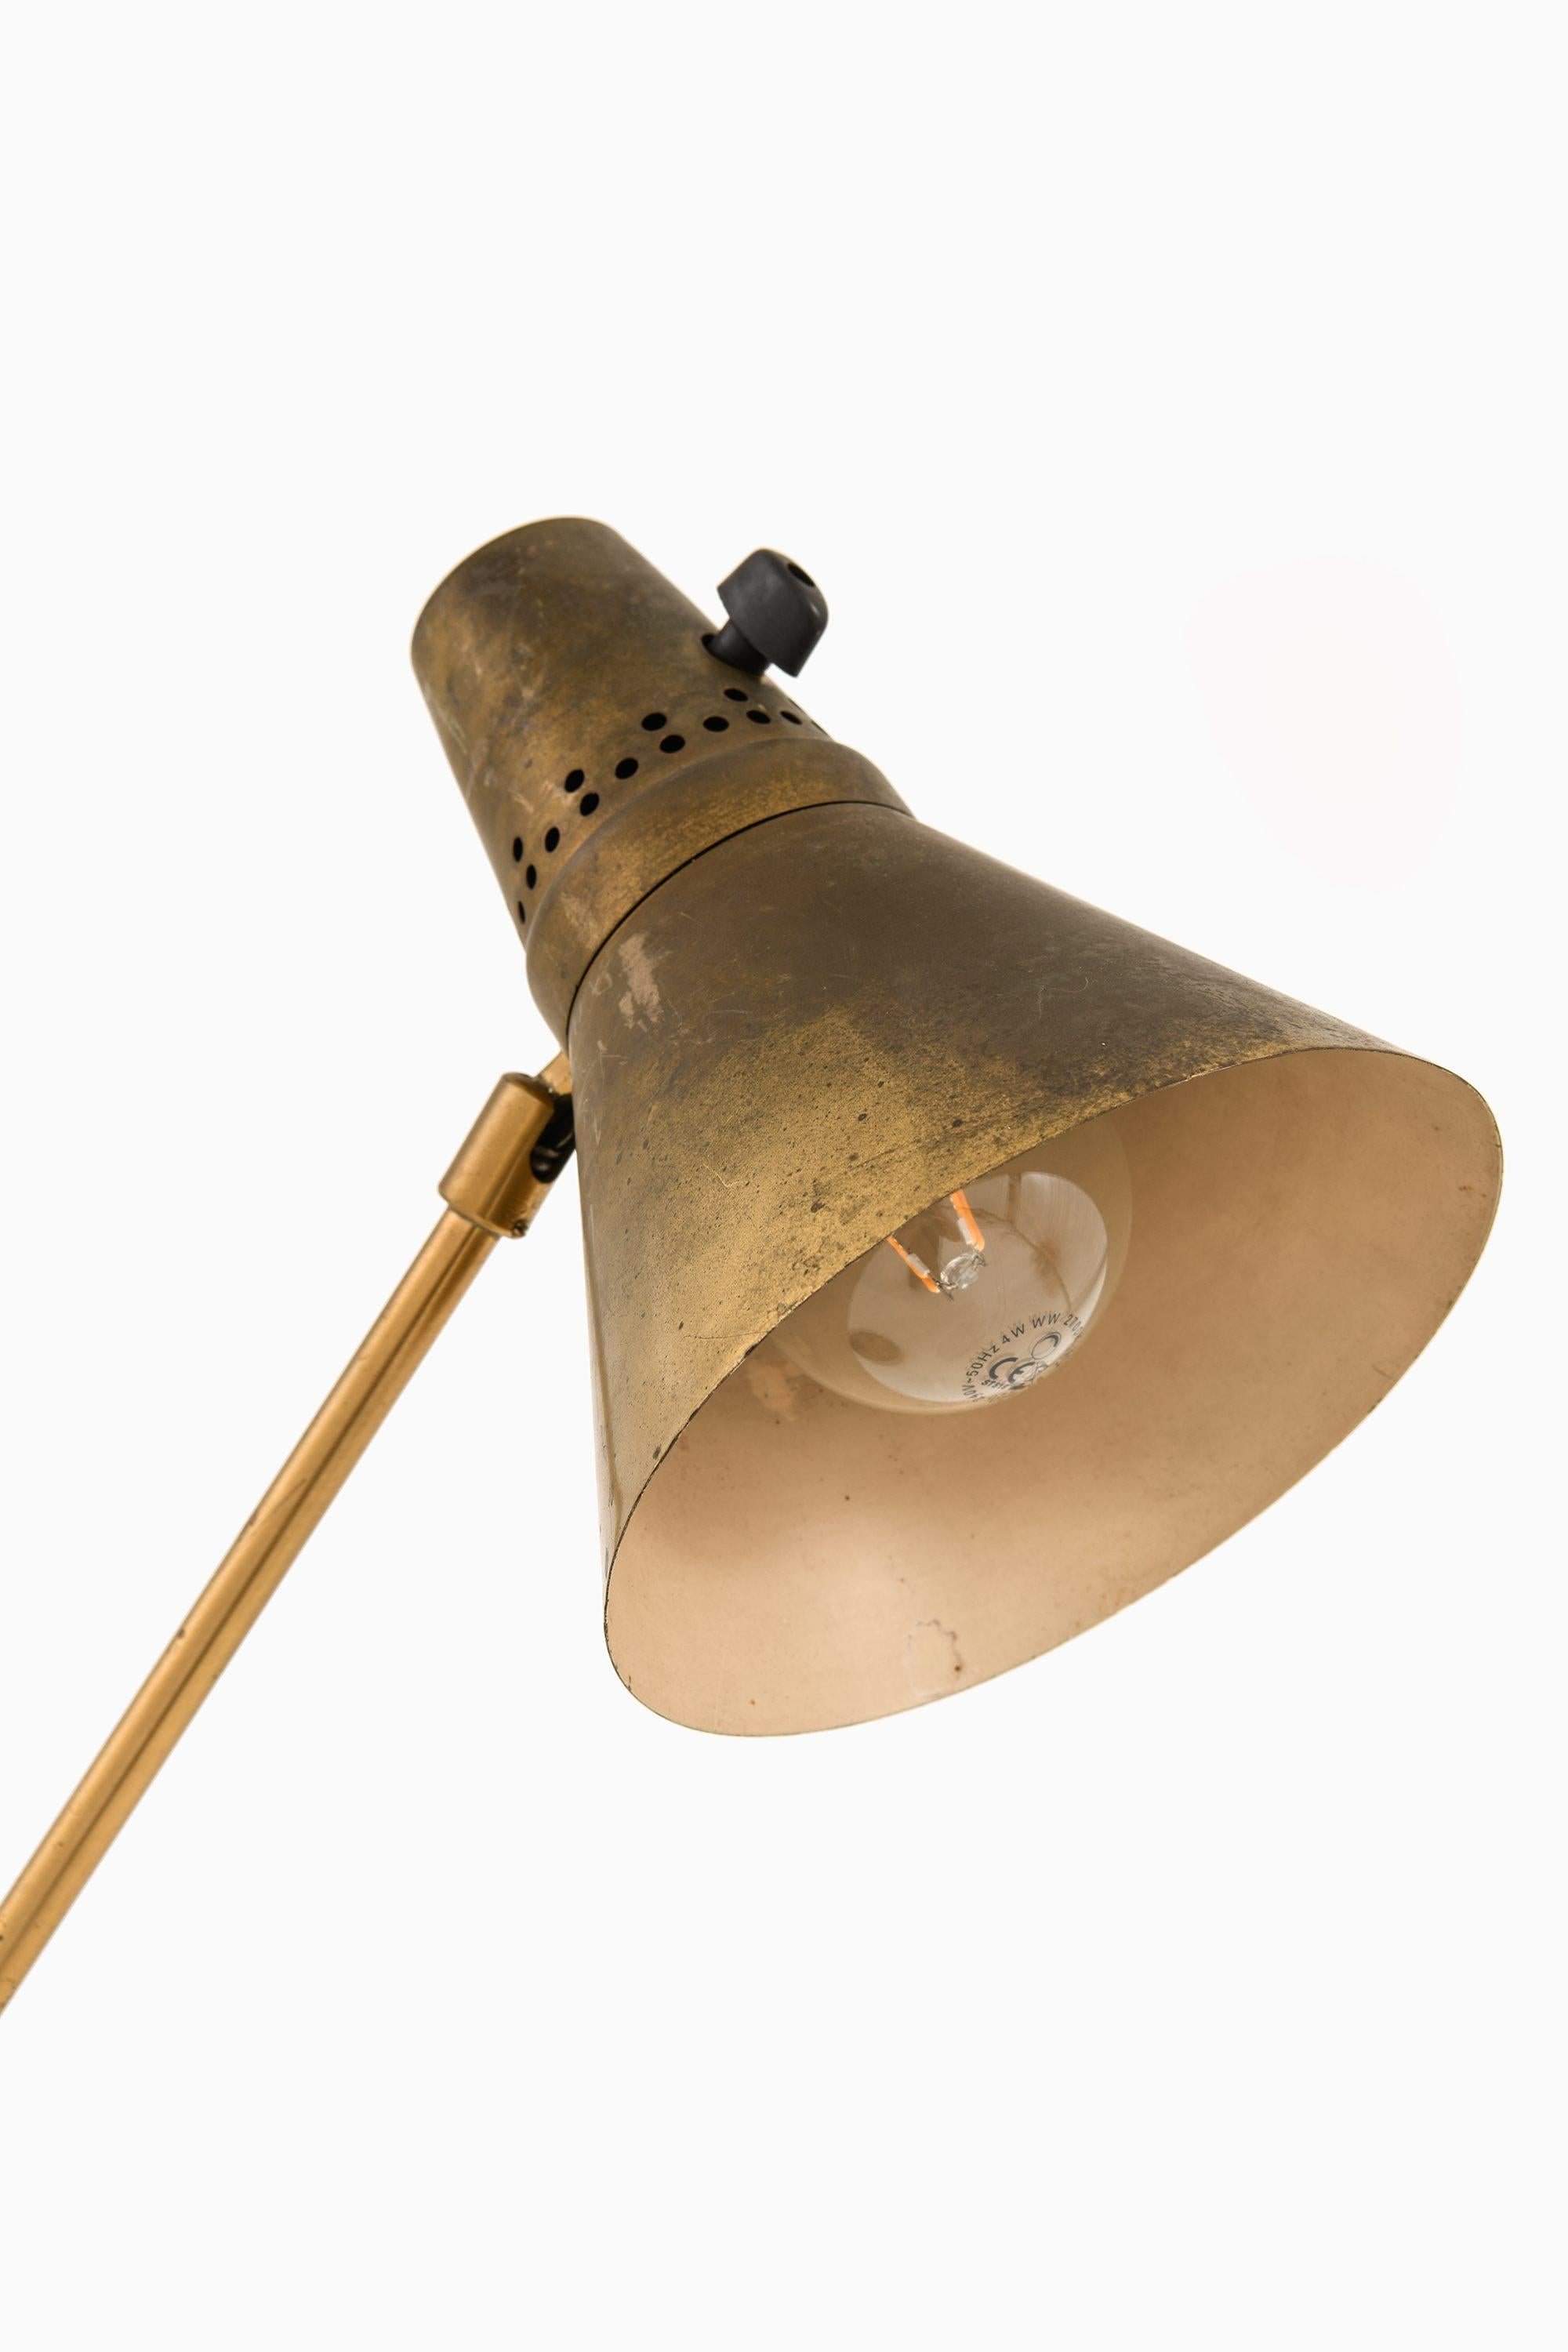 Scandinavian Modern Rare Desk / Table Lamp in Brass and Leather, 1950's For Sale